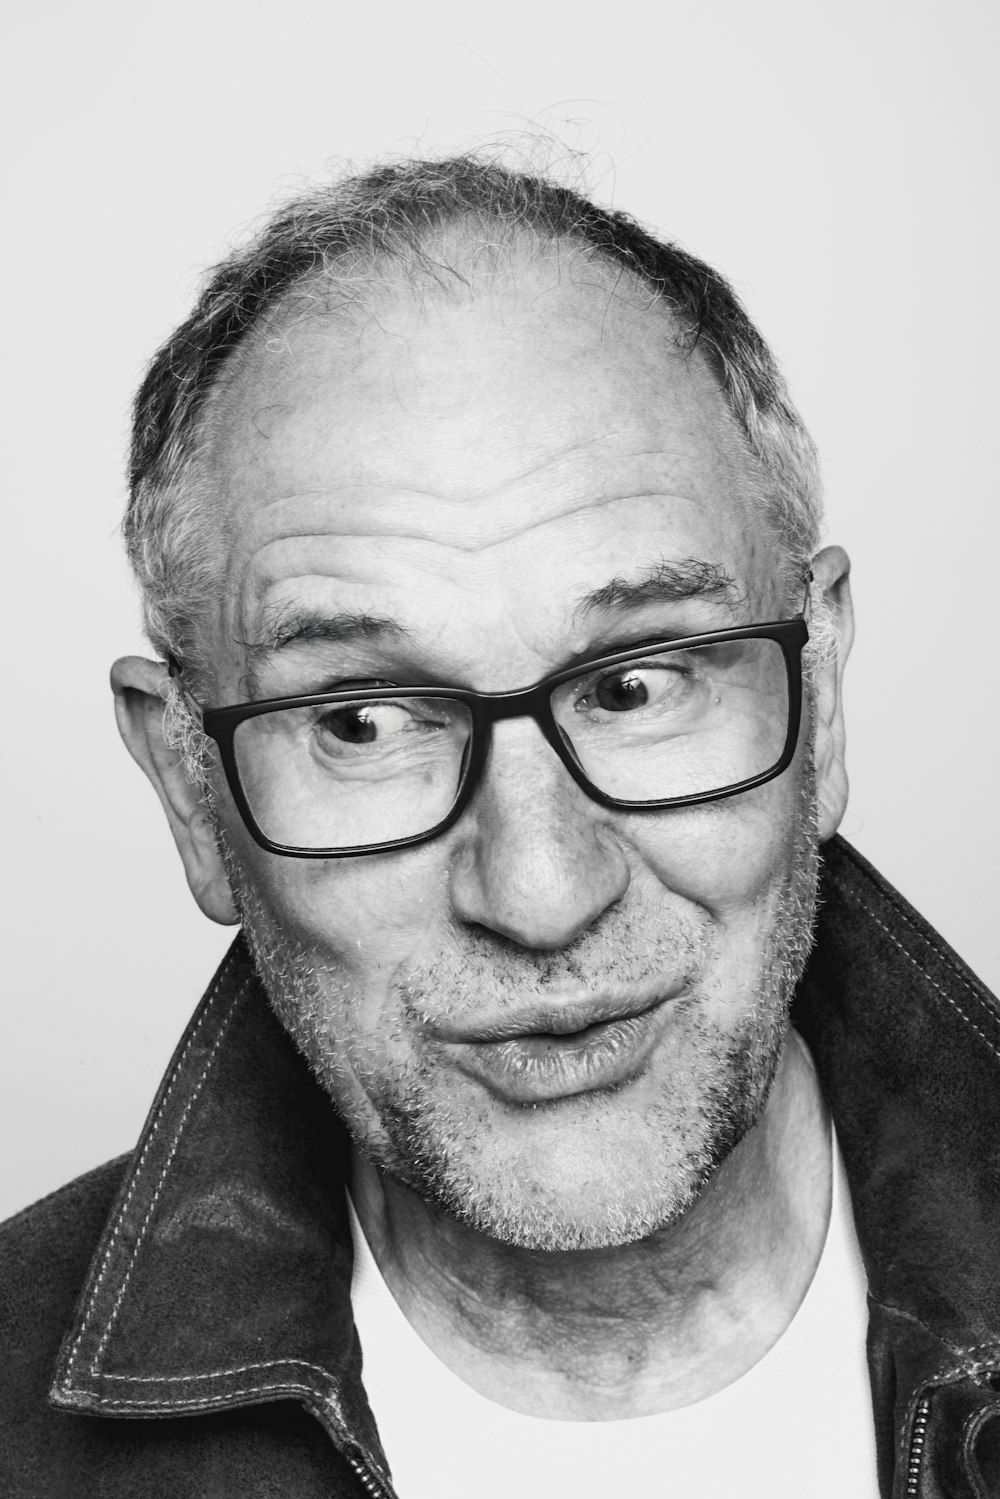 a black and white photo of a man with glasses